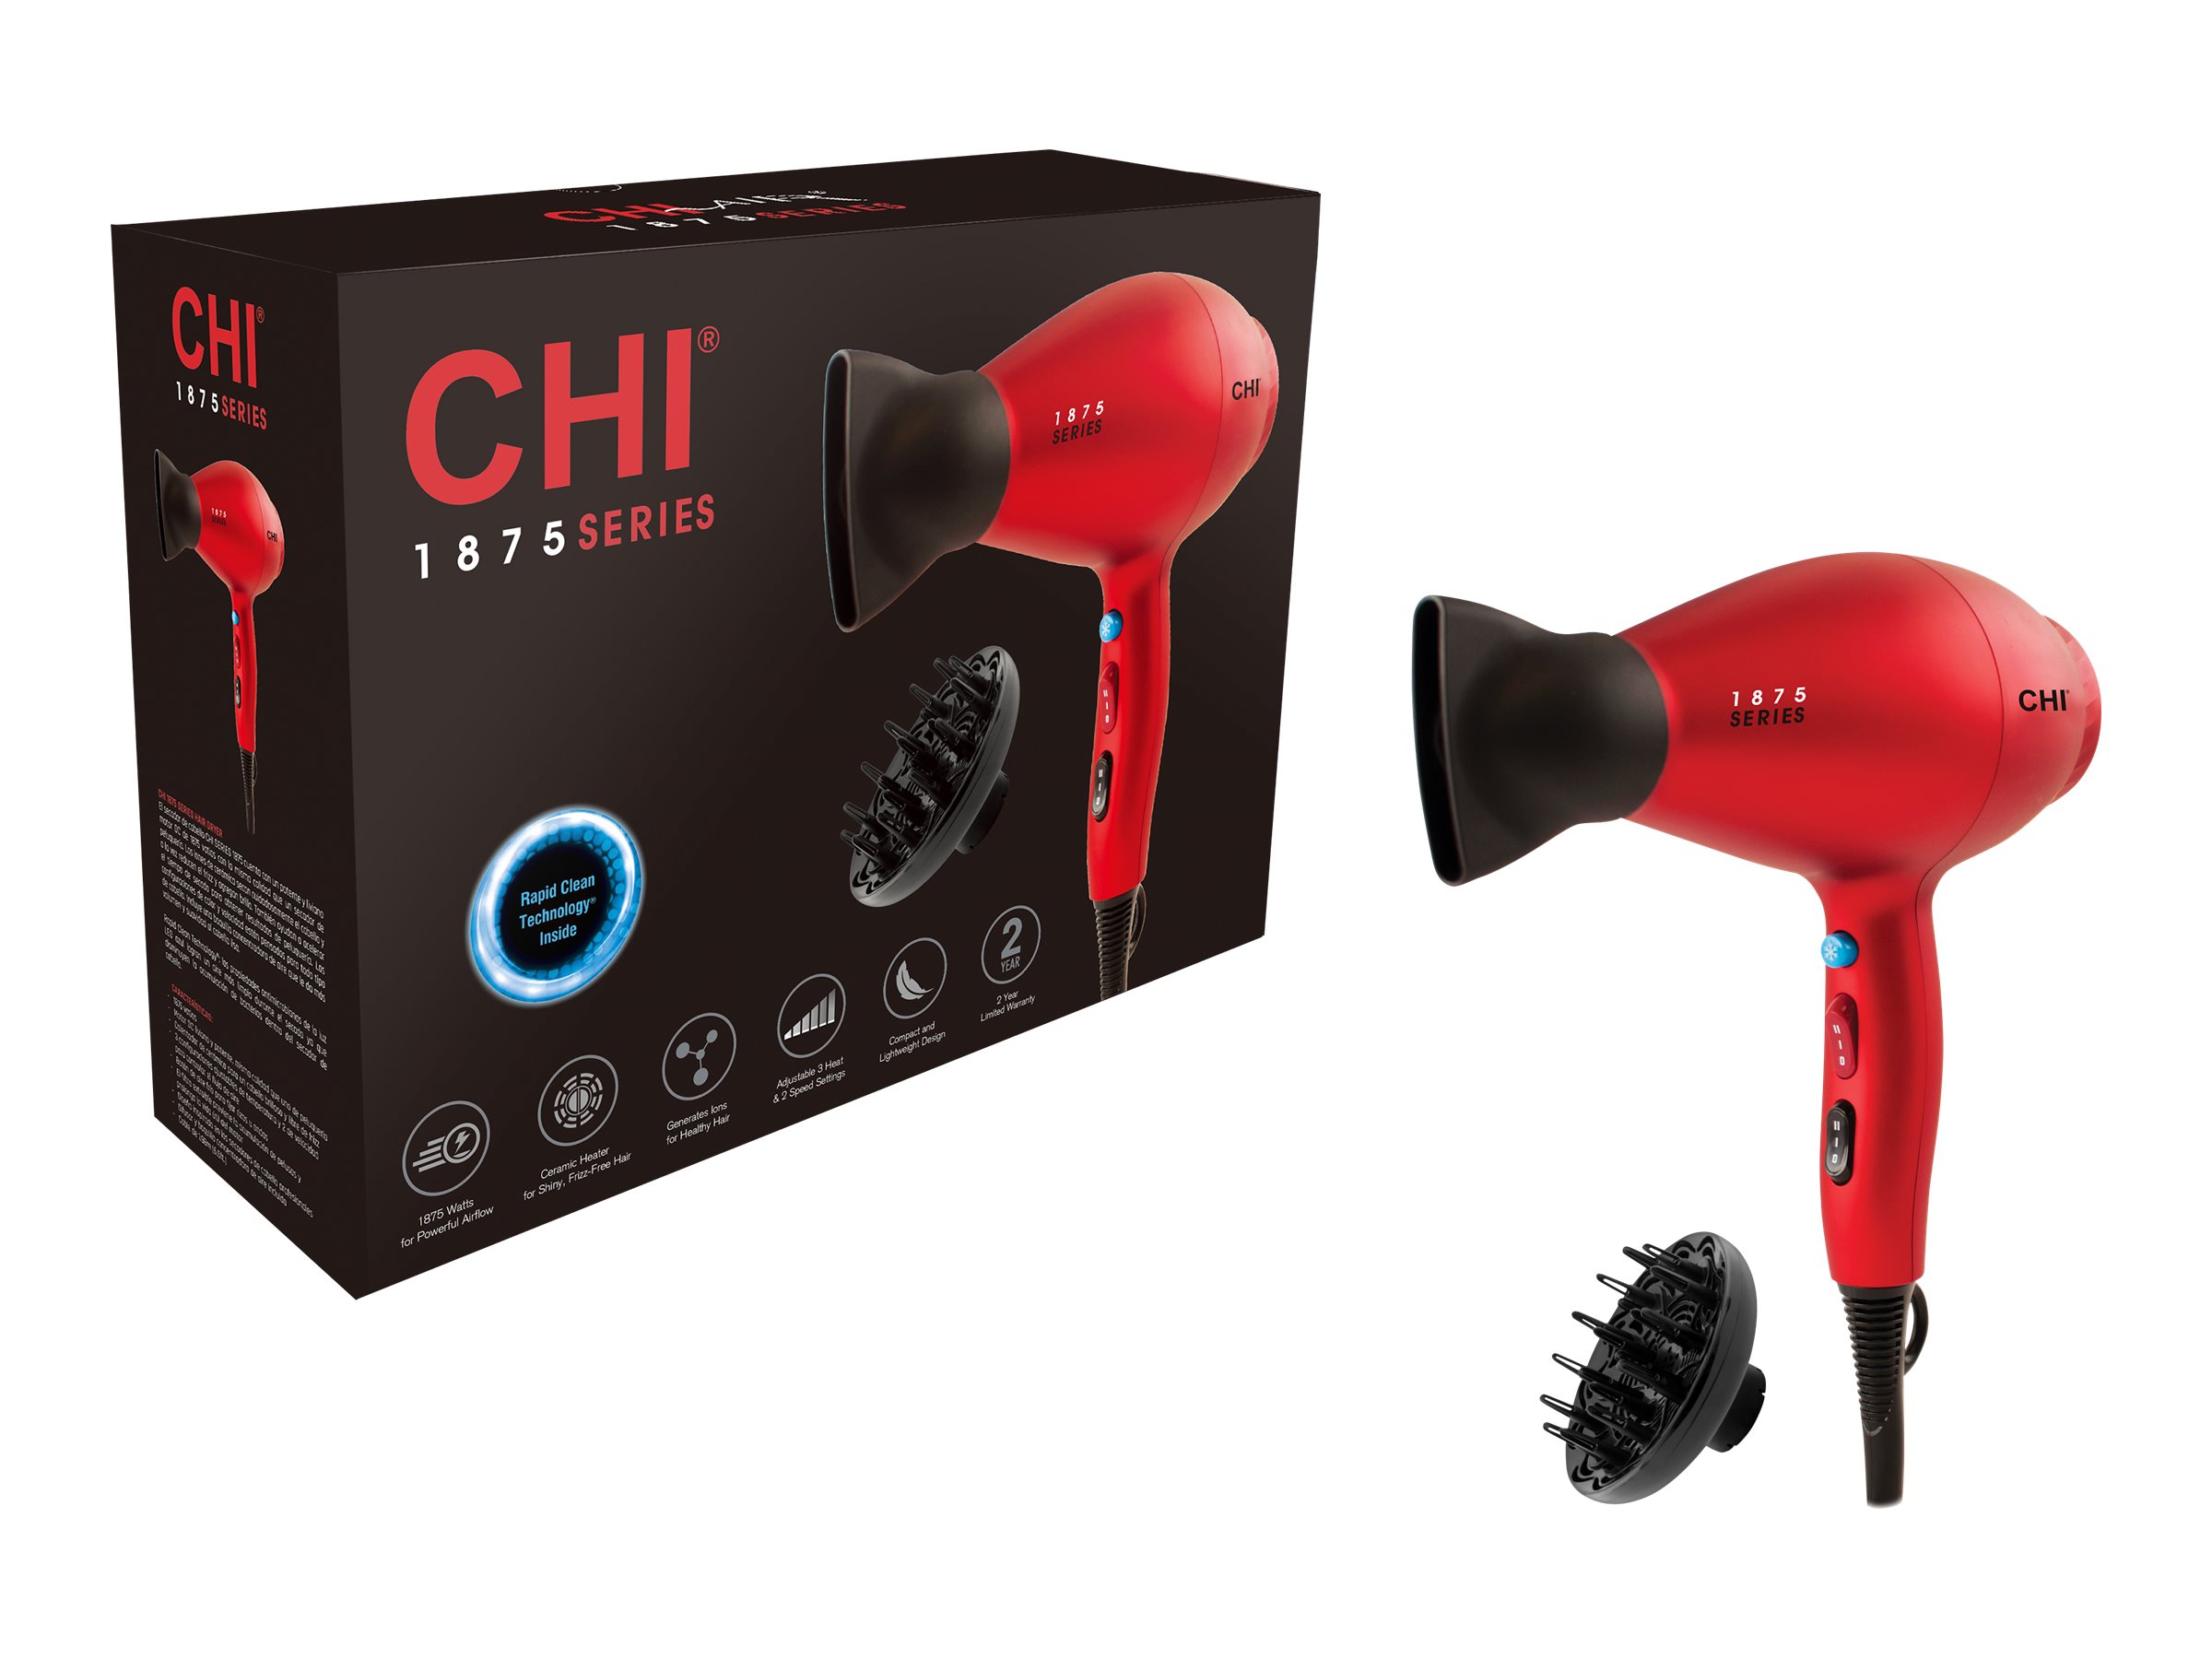 CHI 1875 Series Hair Dryer - Ruby Red - CA2289